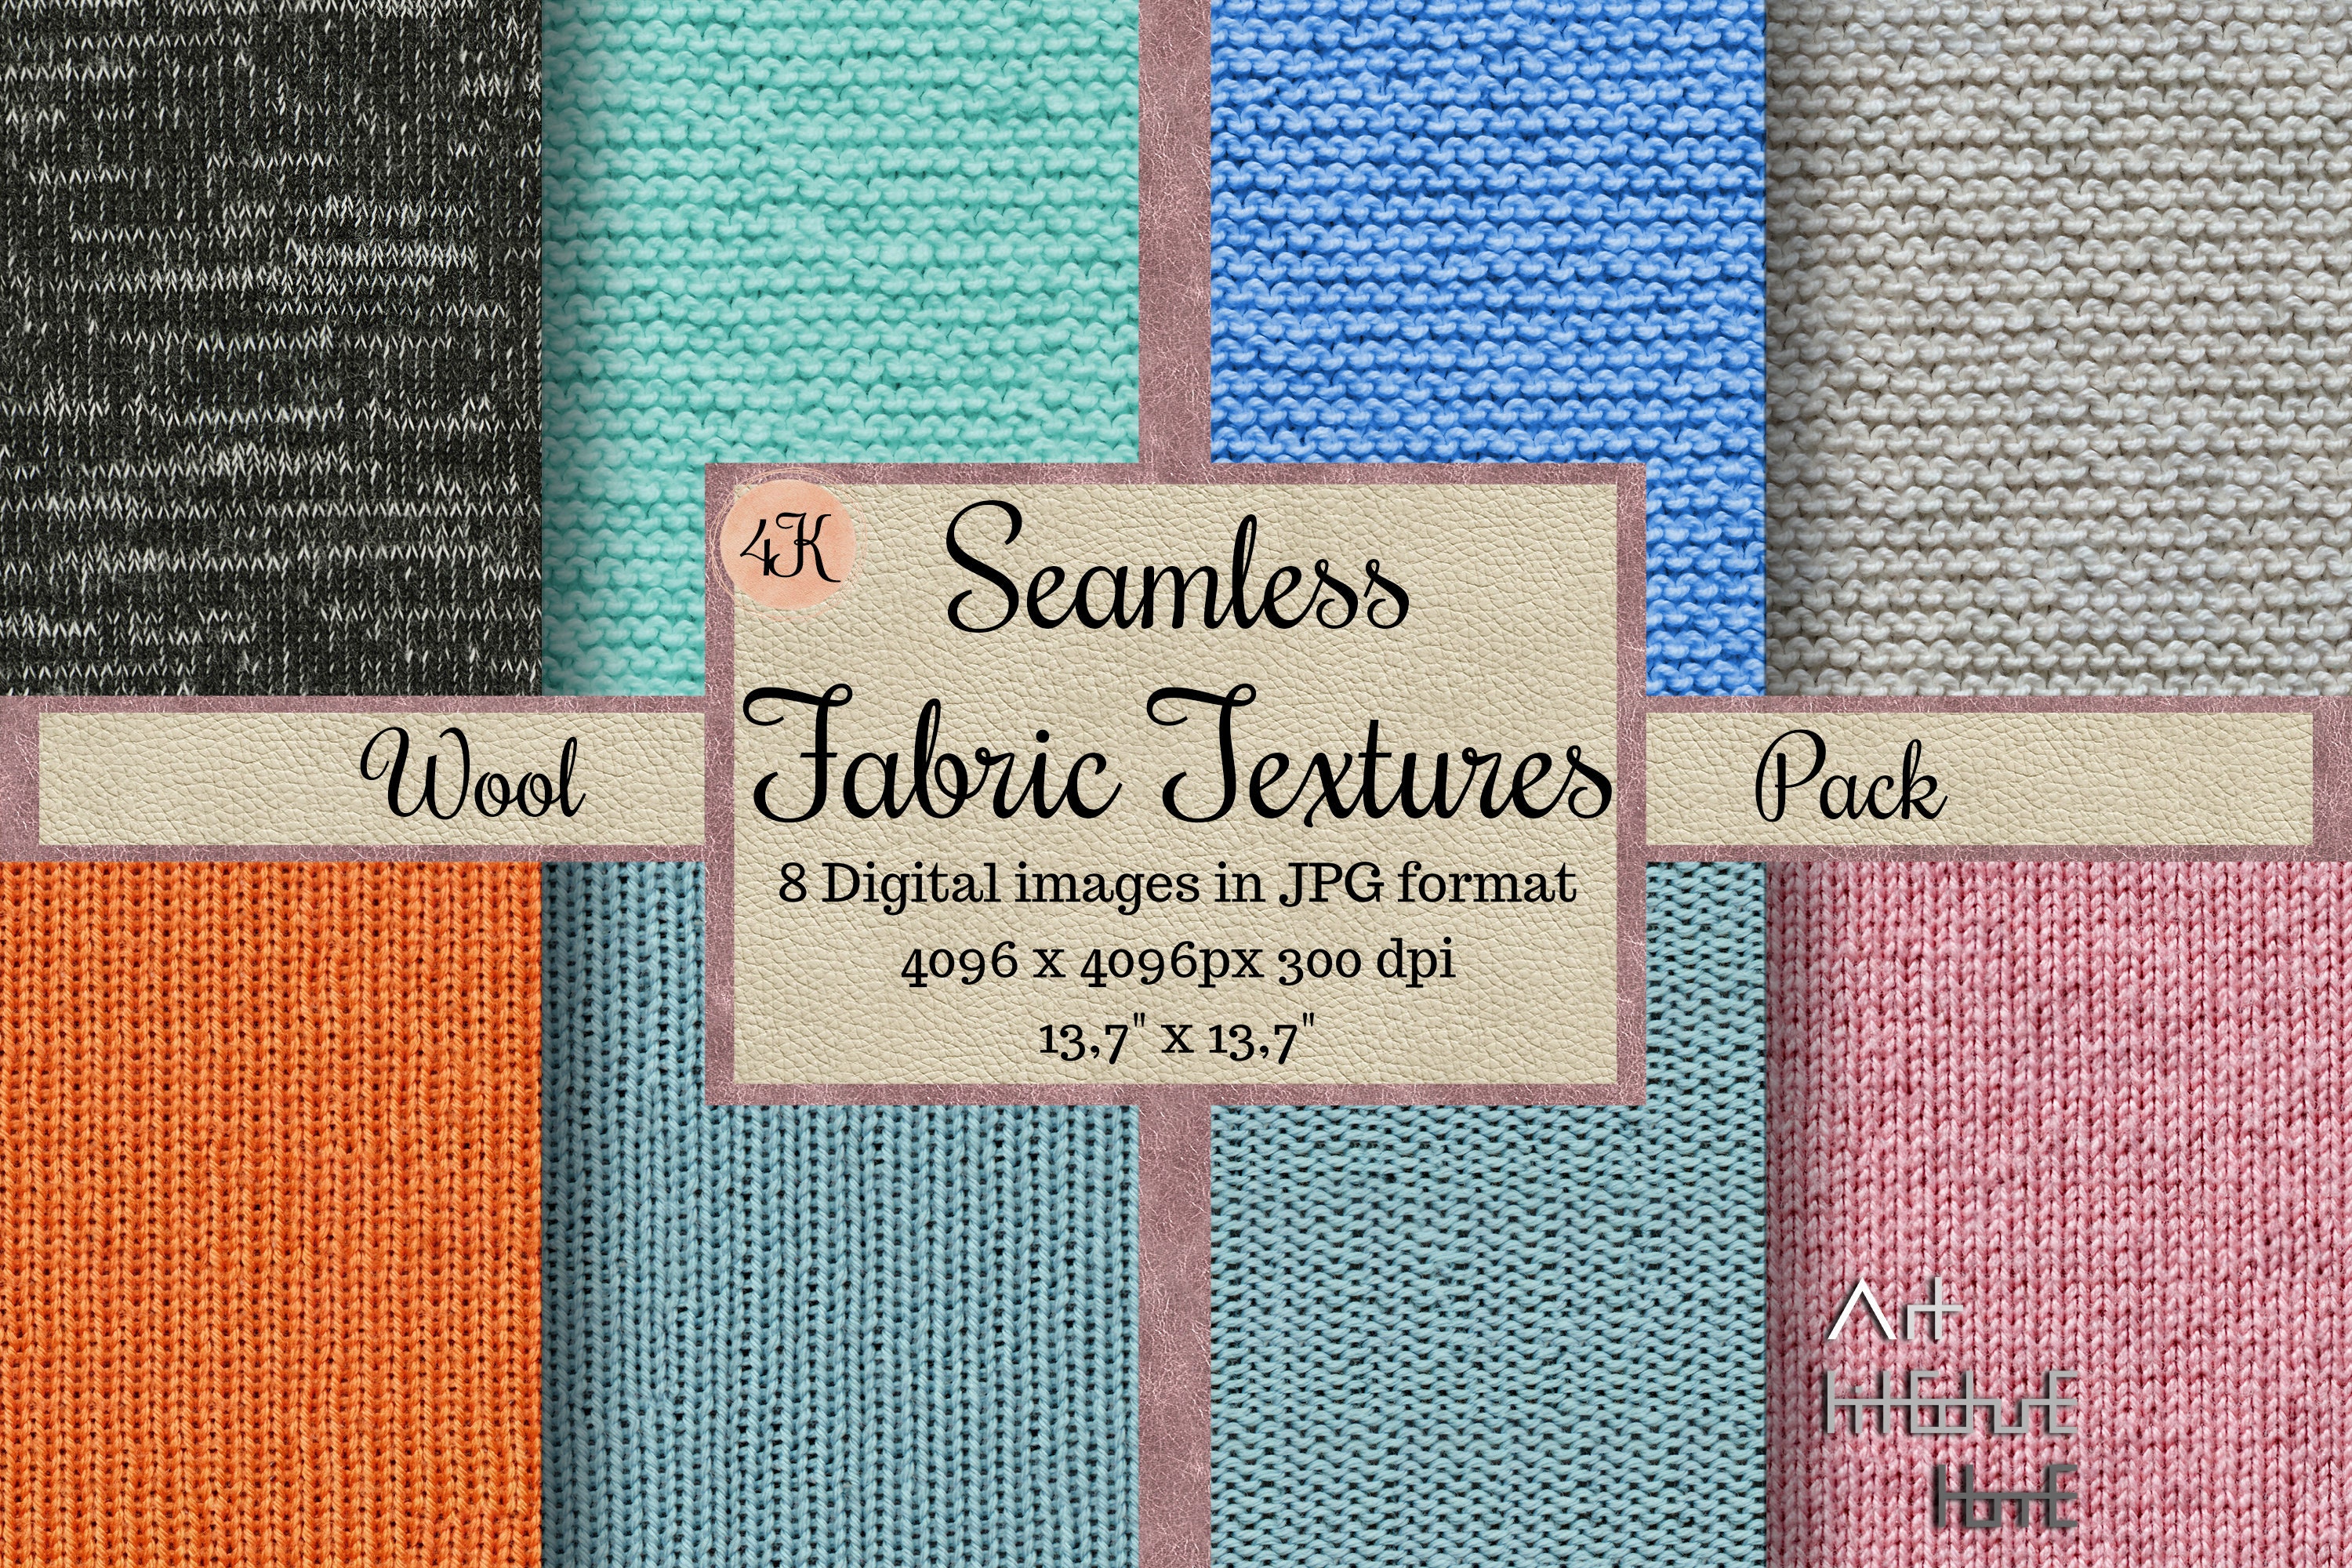 64 Seamless Fabric Textures, Seamless Fabric Patterns, Digital Papers,  Printable Scrapbook Papers, Cotton Wallpaper, Linen Backgrounds Wool -   Canada